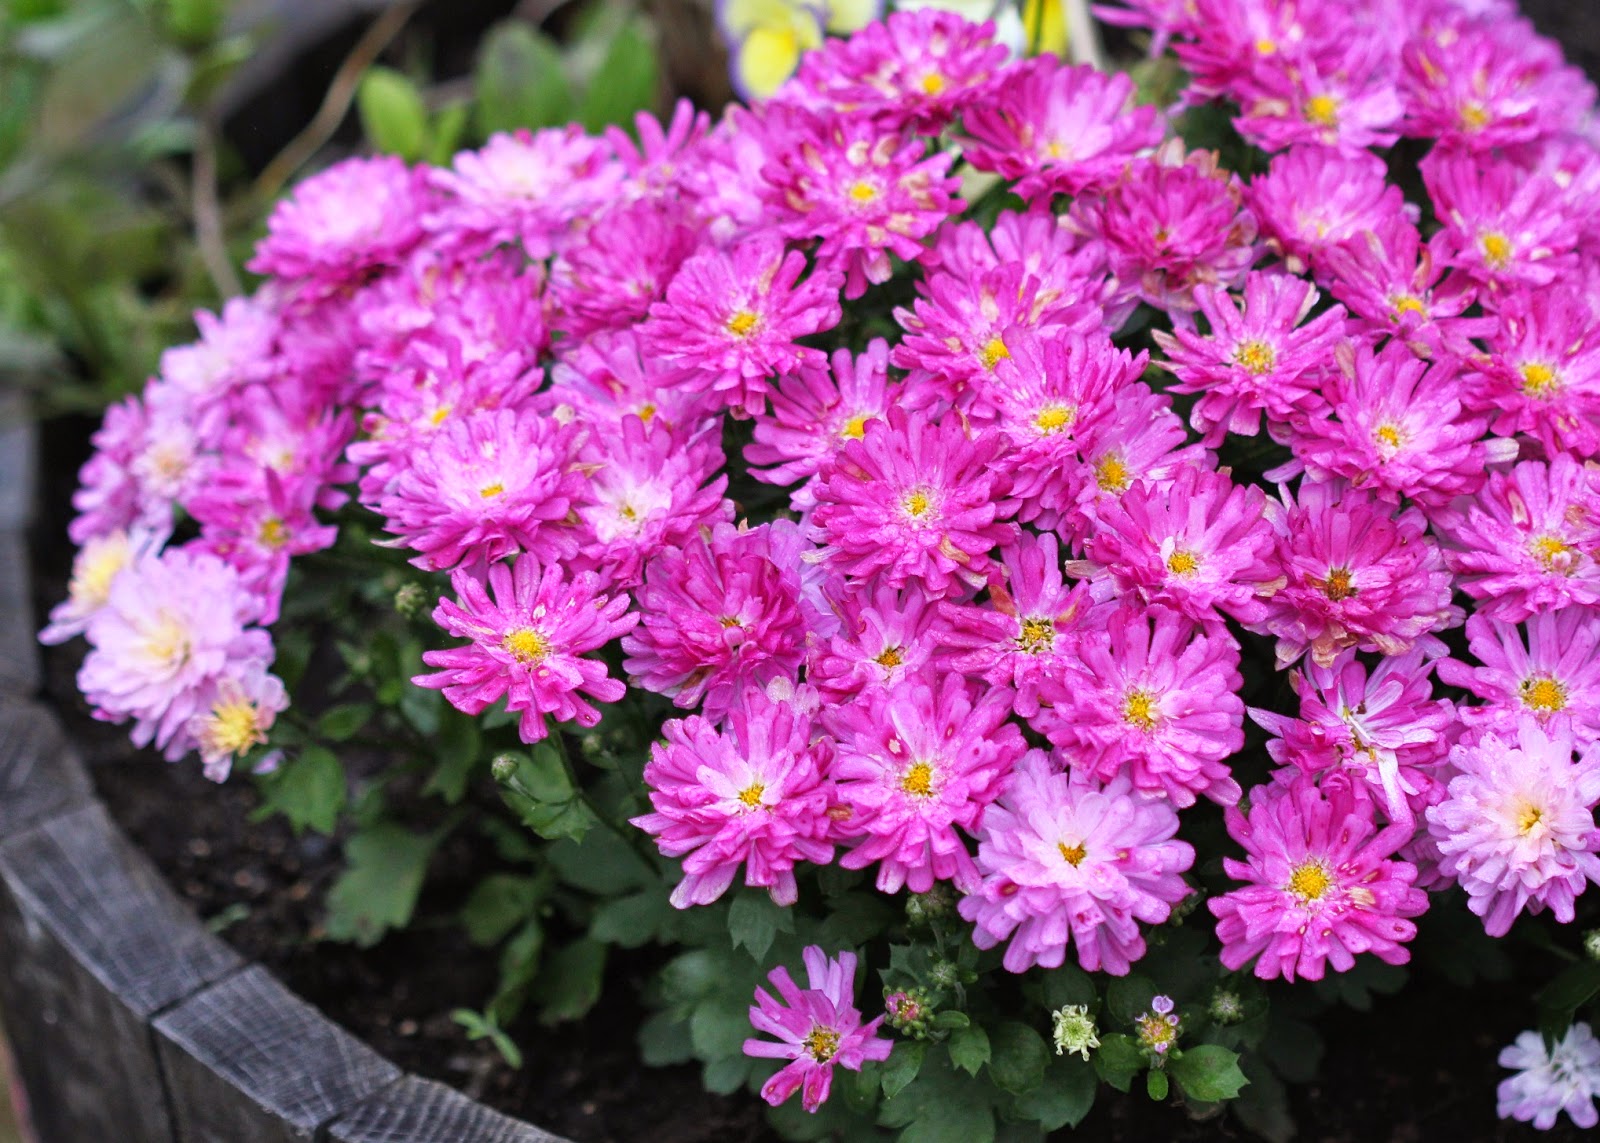  House Garden: The Curious Case of the Color Changing Chrysanthemums